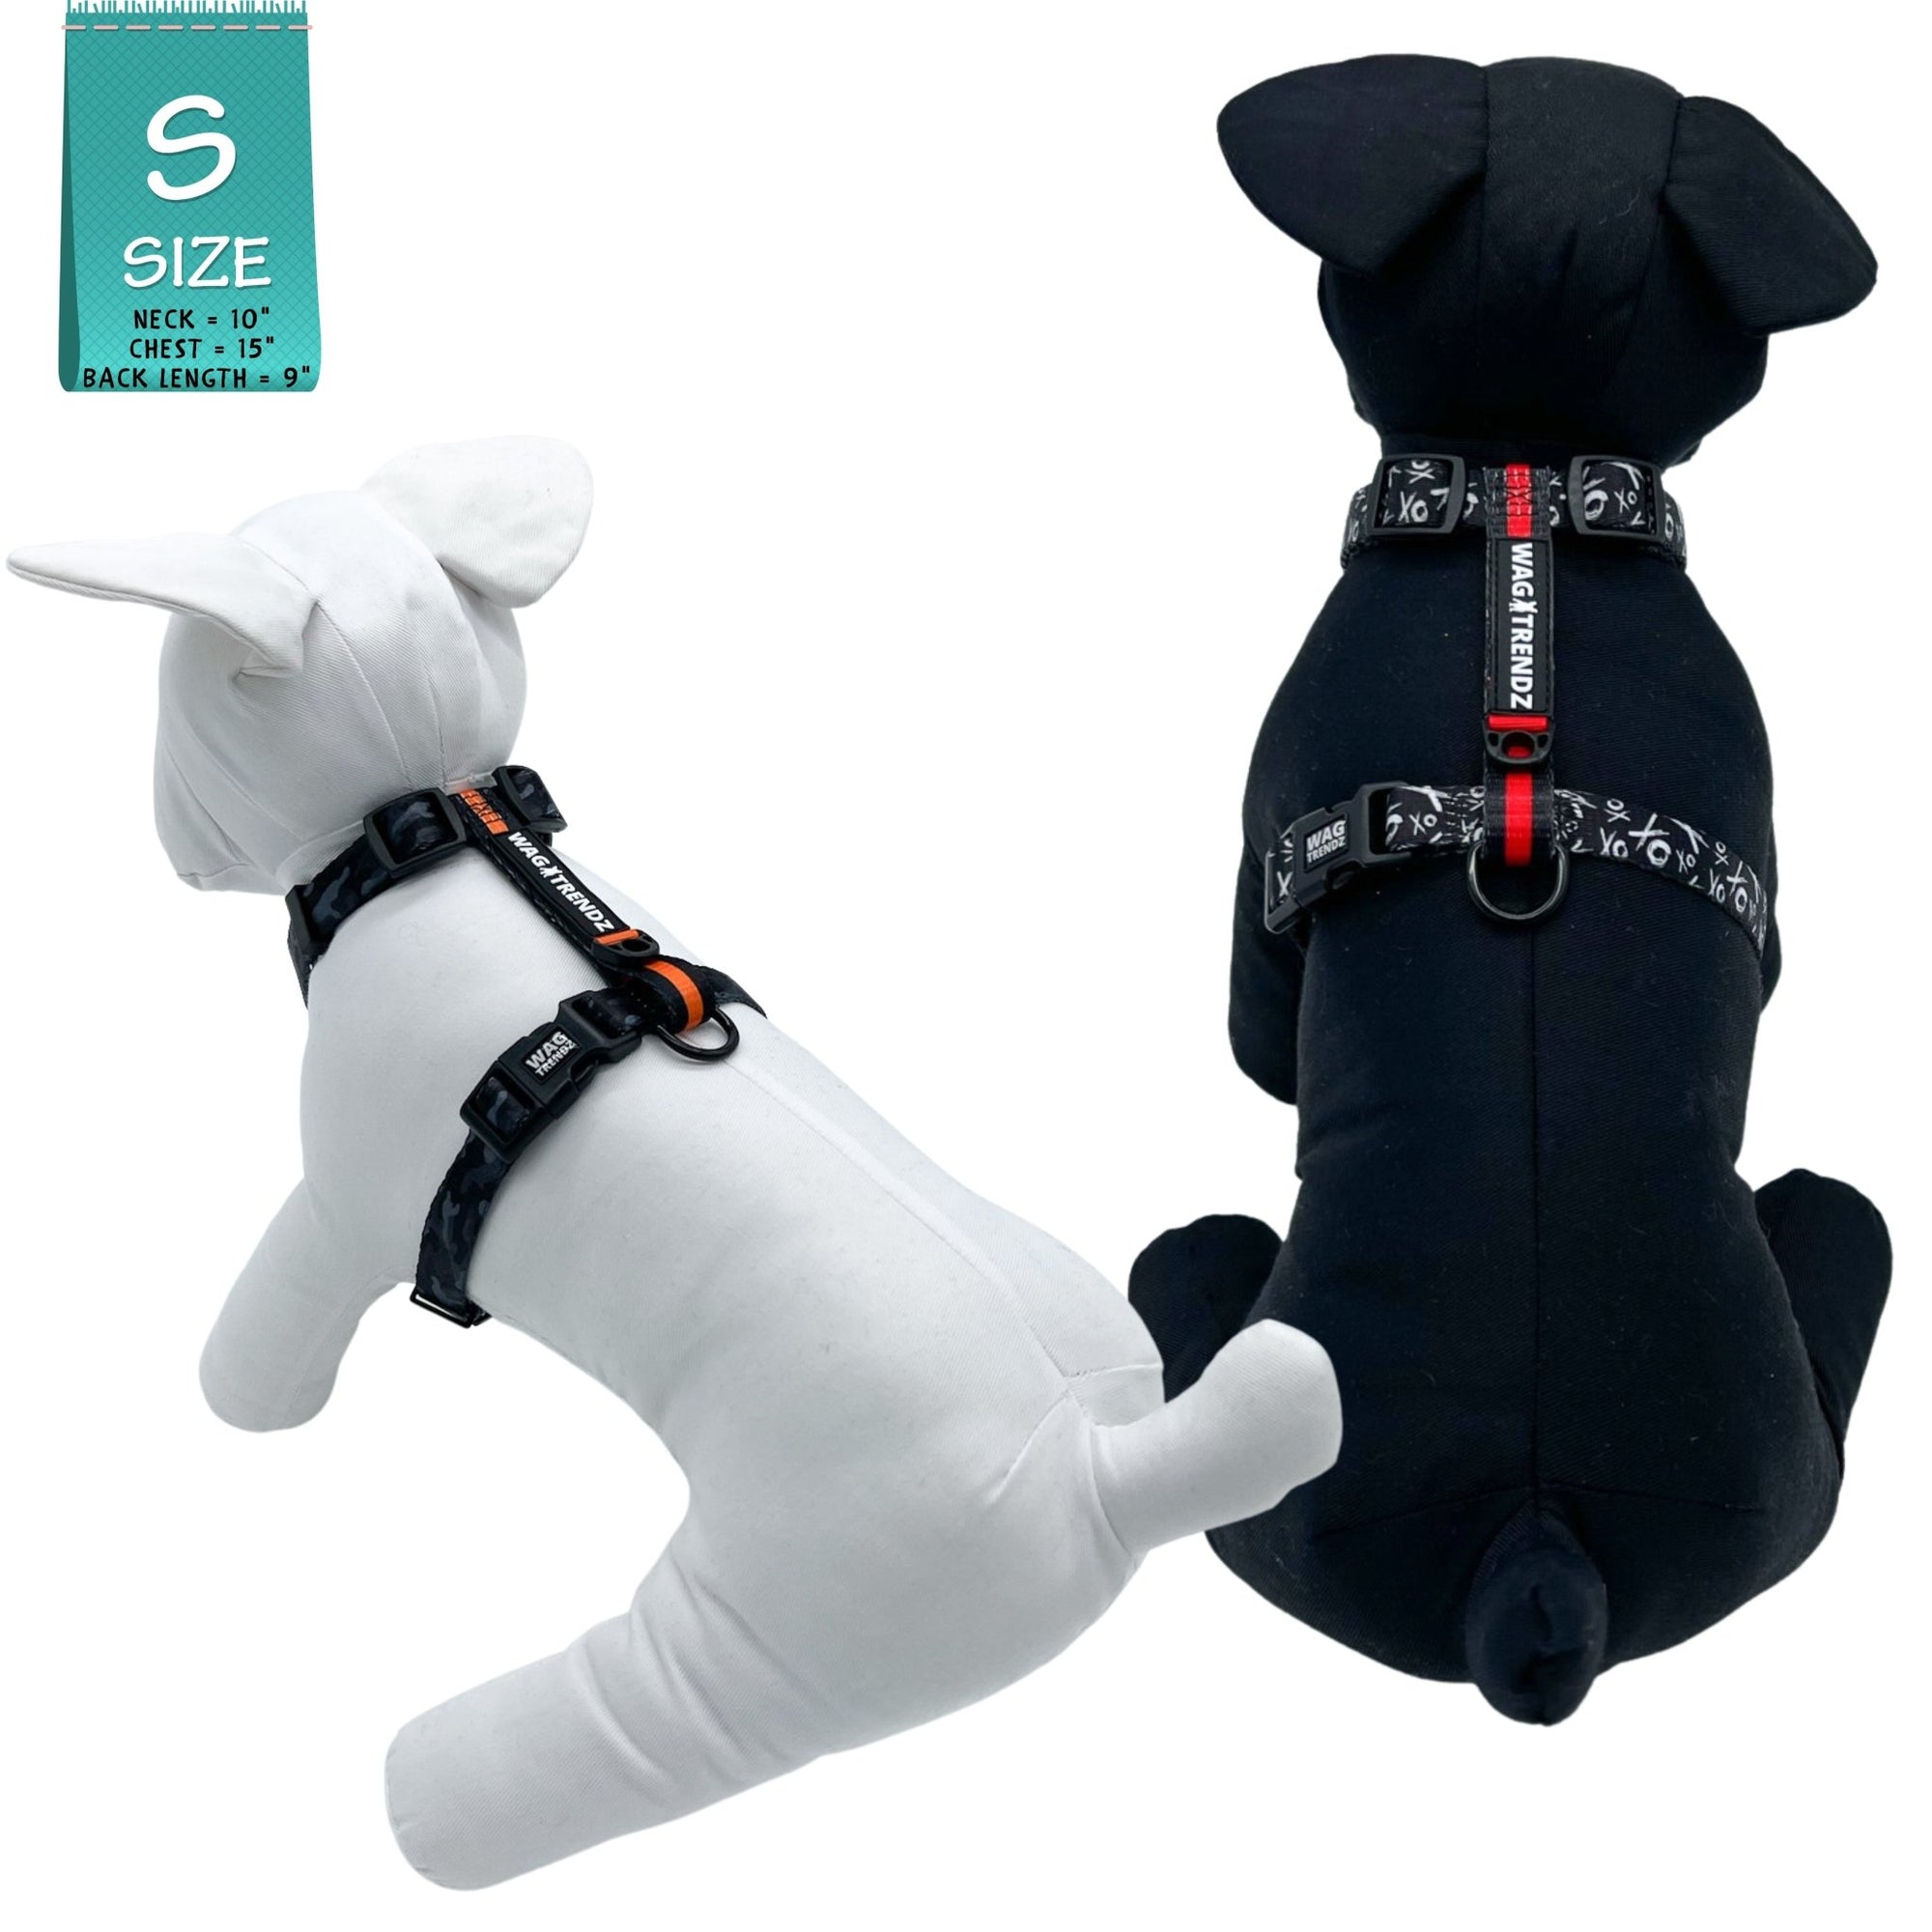 H Dog Harness - Roman Dog Harness - worn by two stuffed dogs (one black &amp; one white) wearing black and white XO pattern dog harness with red accents - against a solid white background - Wag Trendz